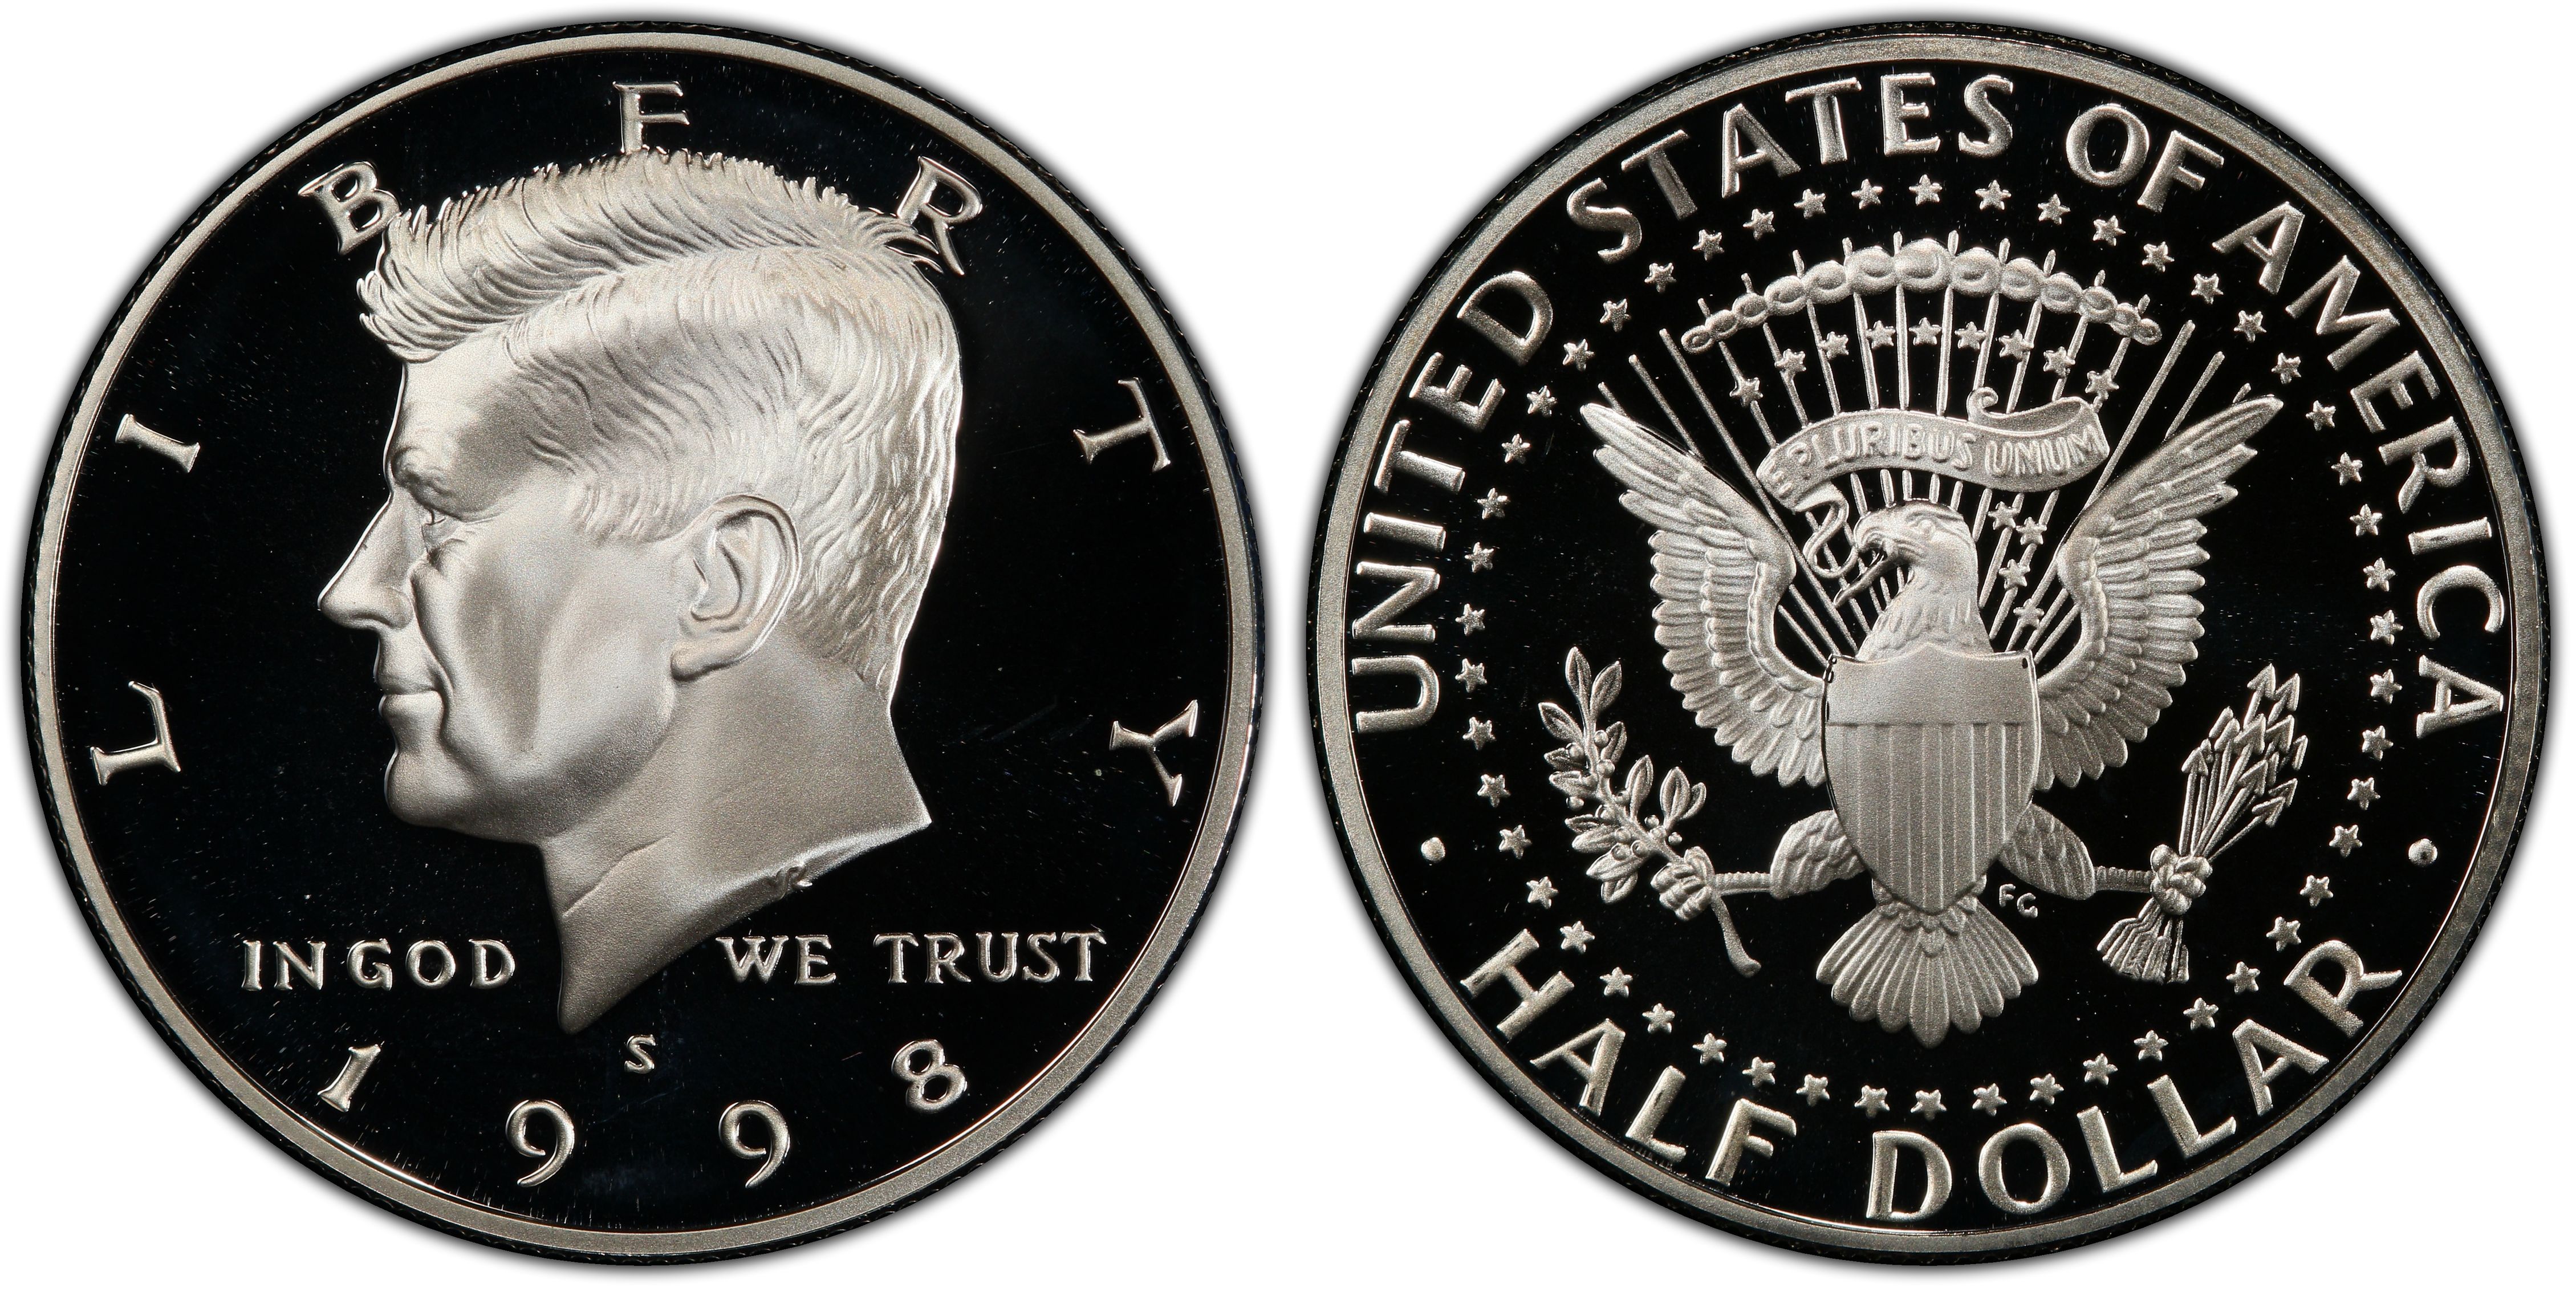 SILVER 1998 S Proof John Kennedy Half Dollar With Capsule Combined Shipping